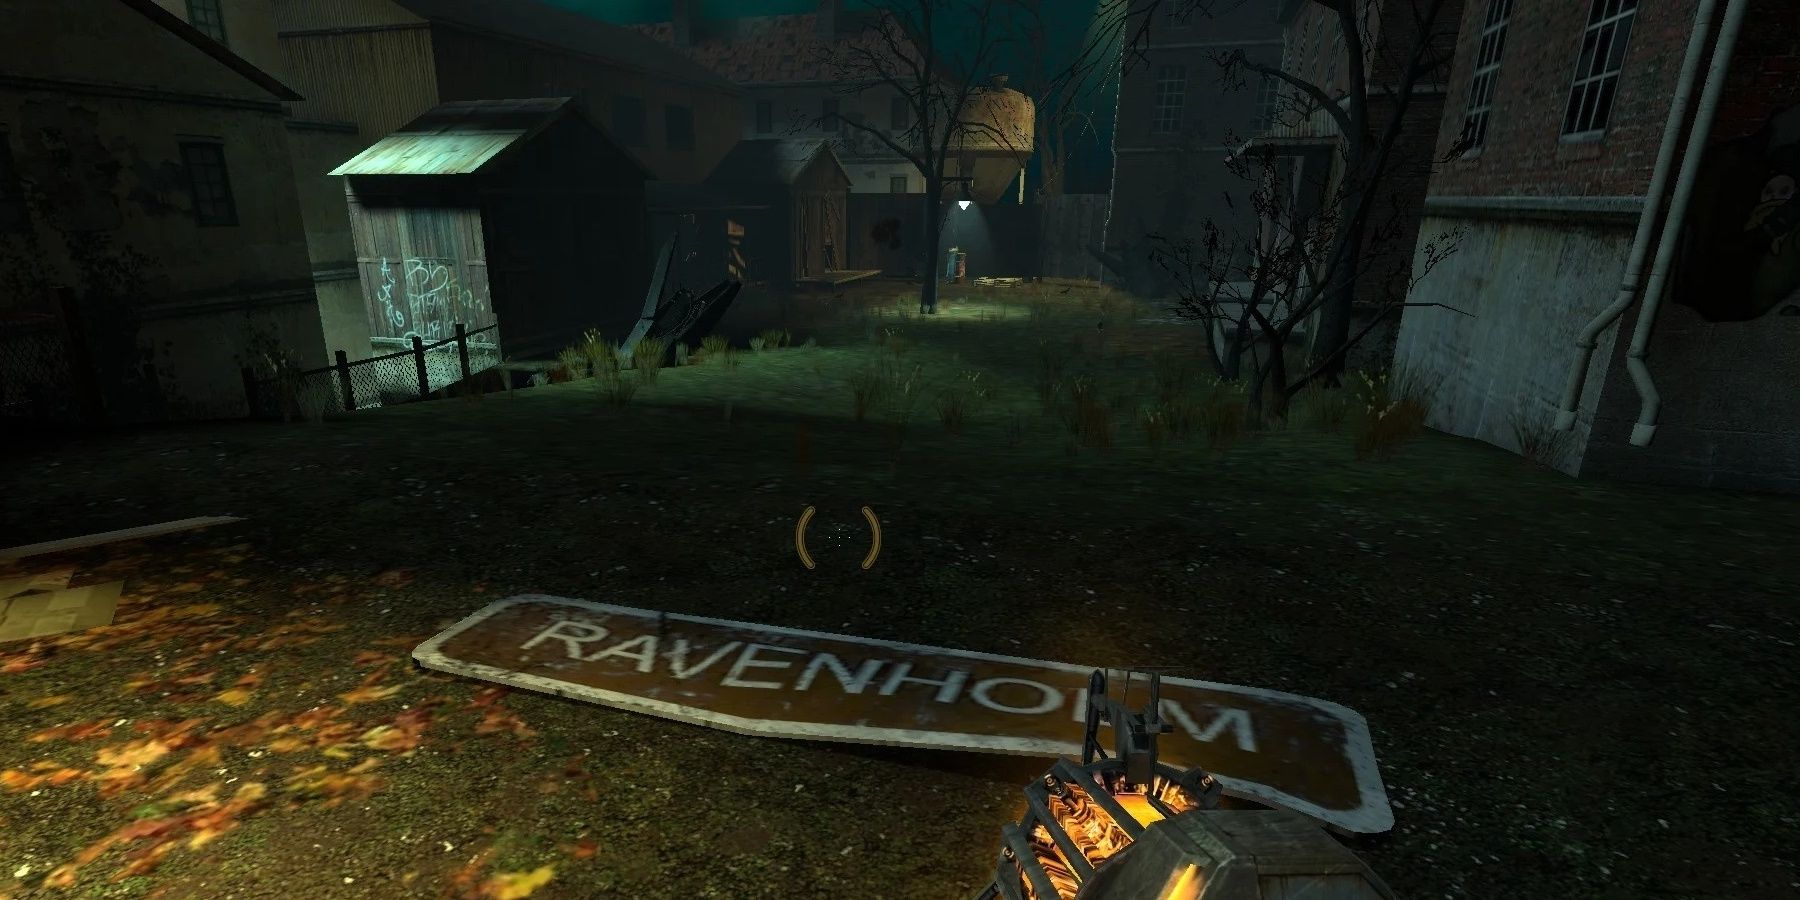 ravenholm town from Half Life 2 at night